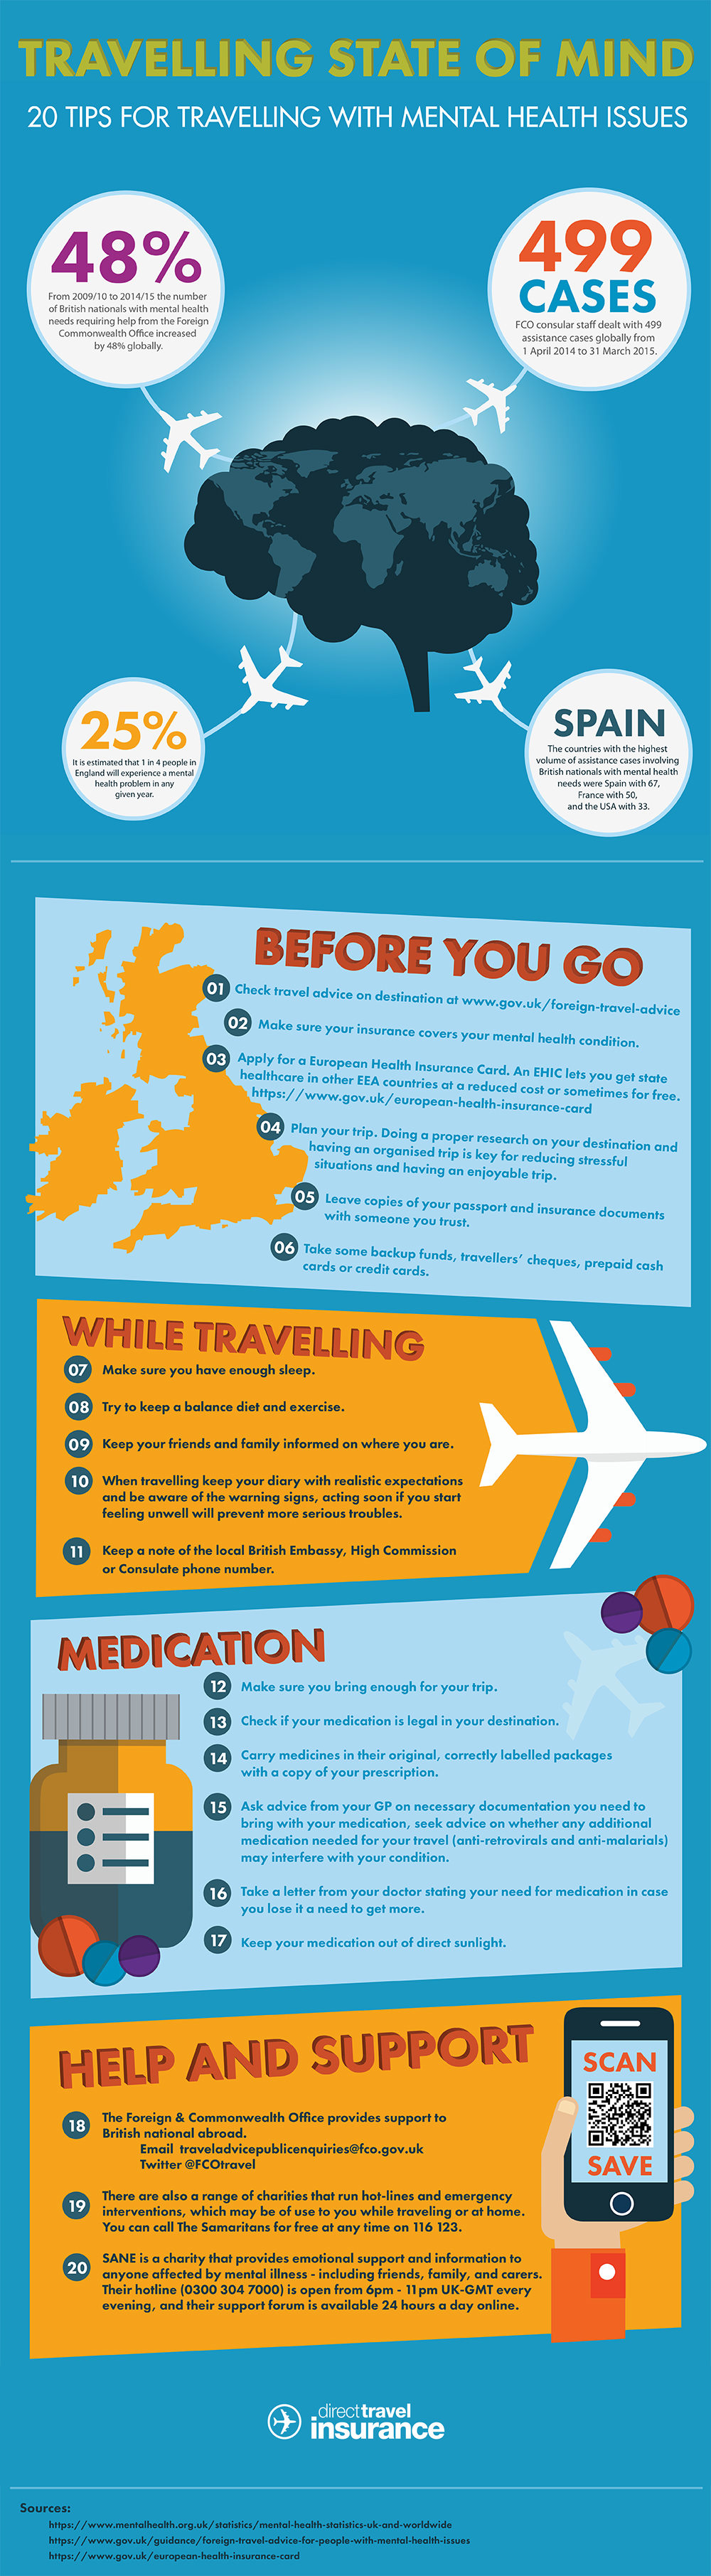 Direct Travel Mental Health Travelling Tips Infographic